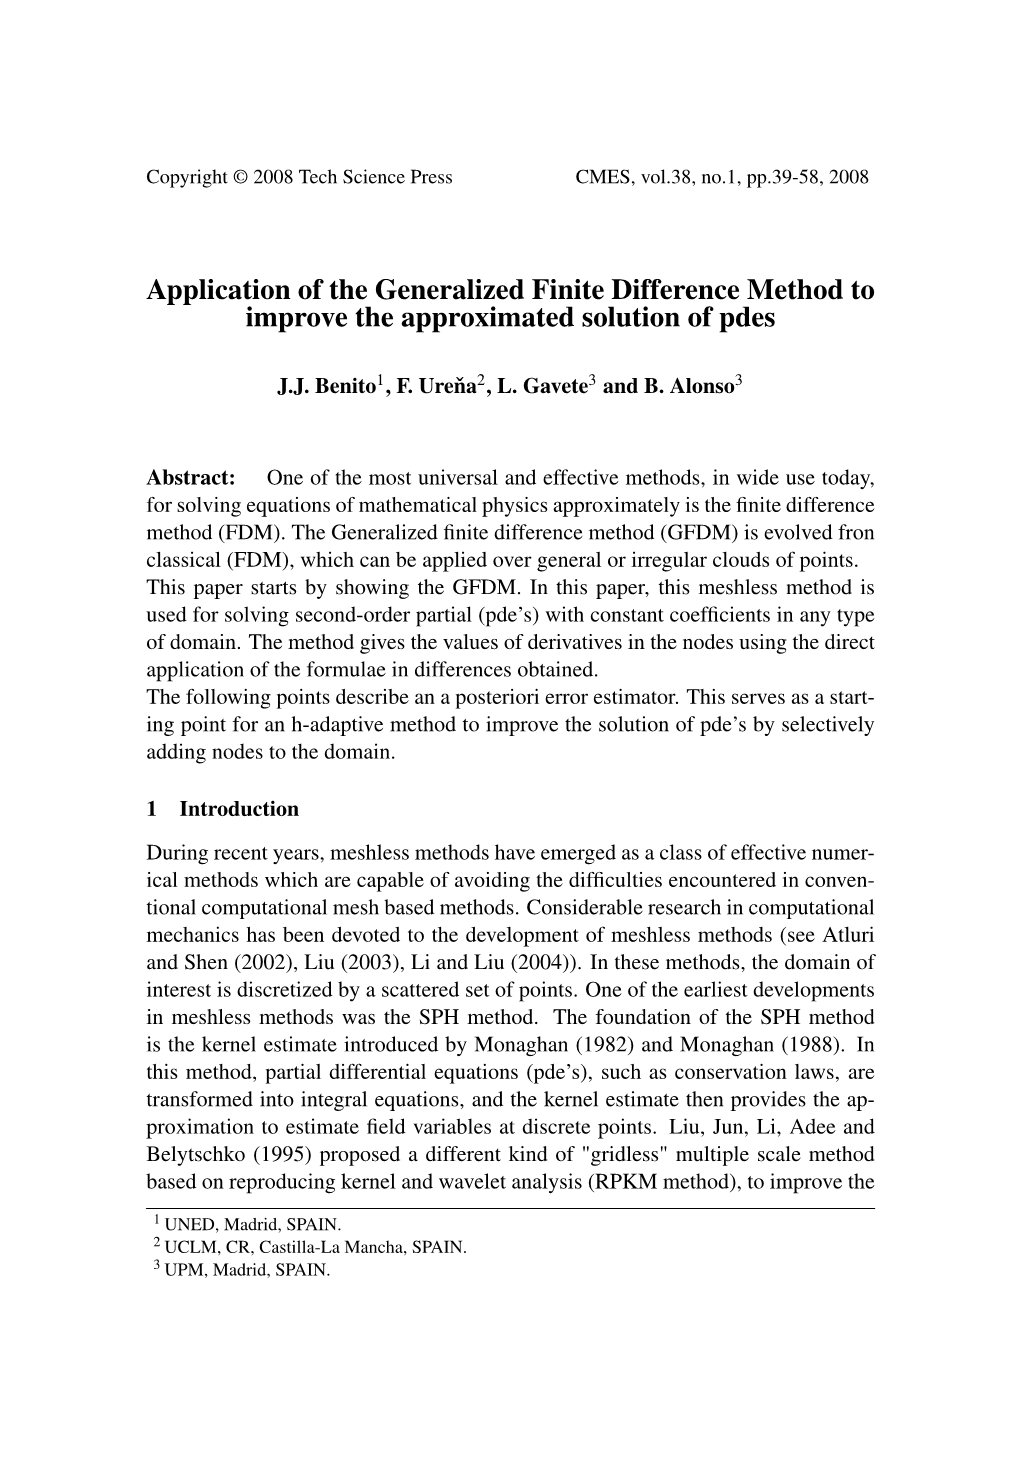 Application of the Generalized Finite Difference Method to Improve the Approximated Solution of Pdes